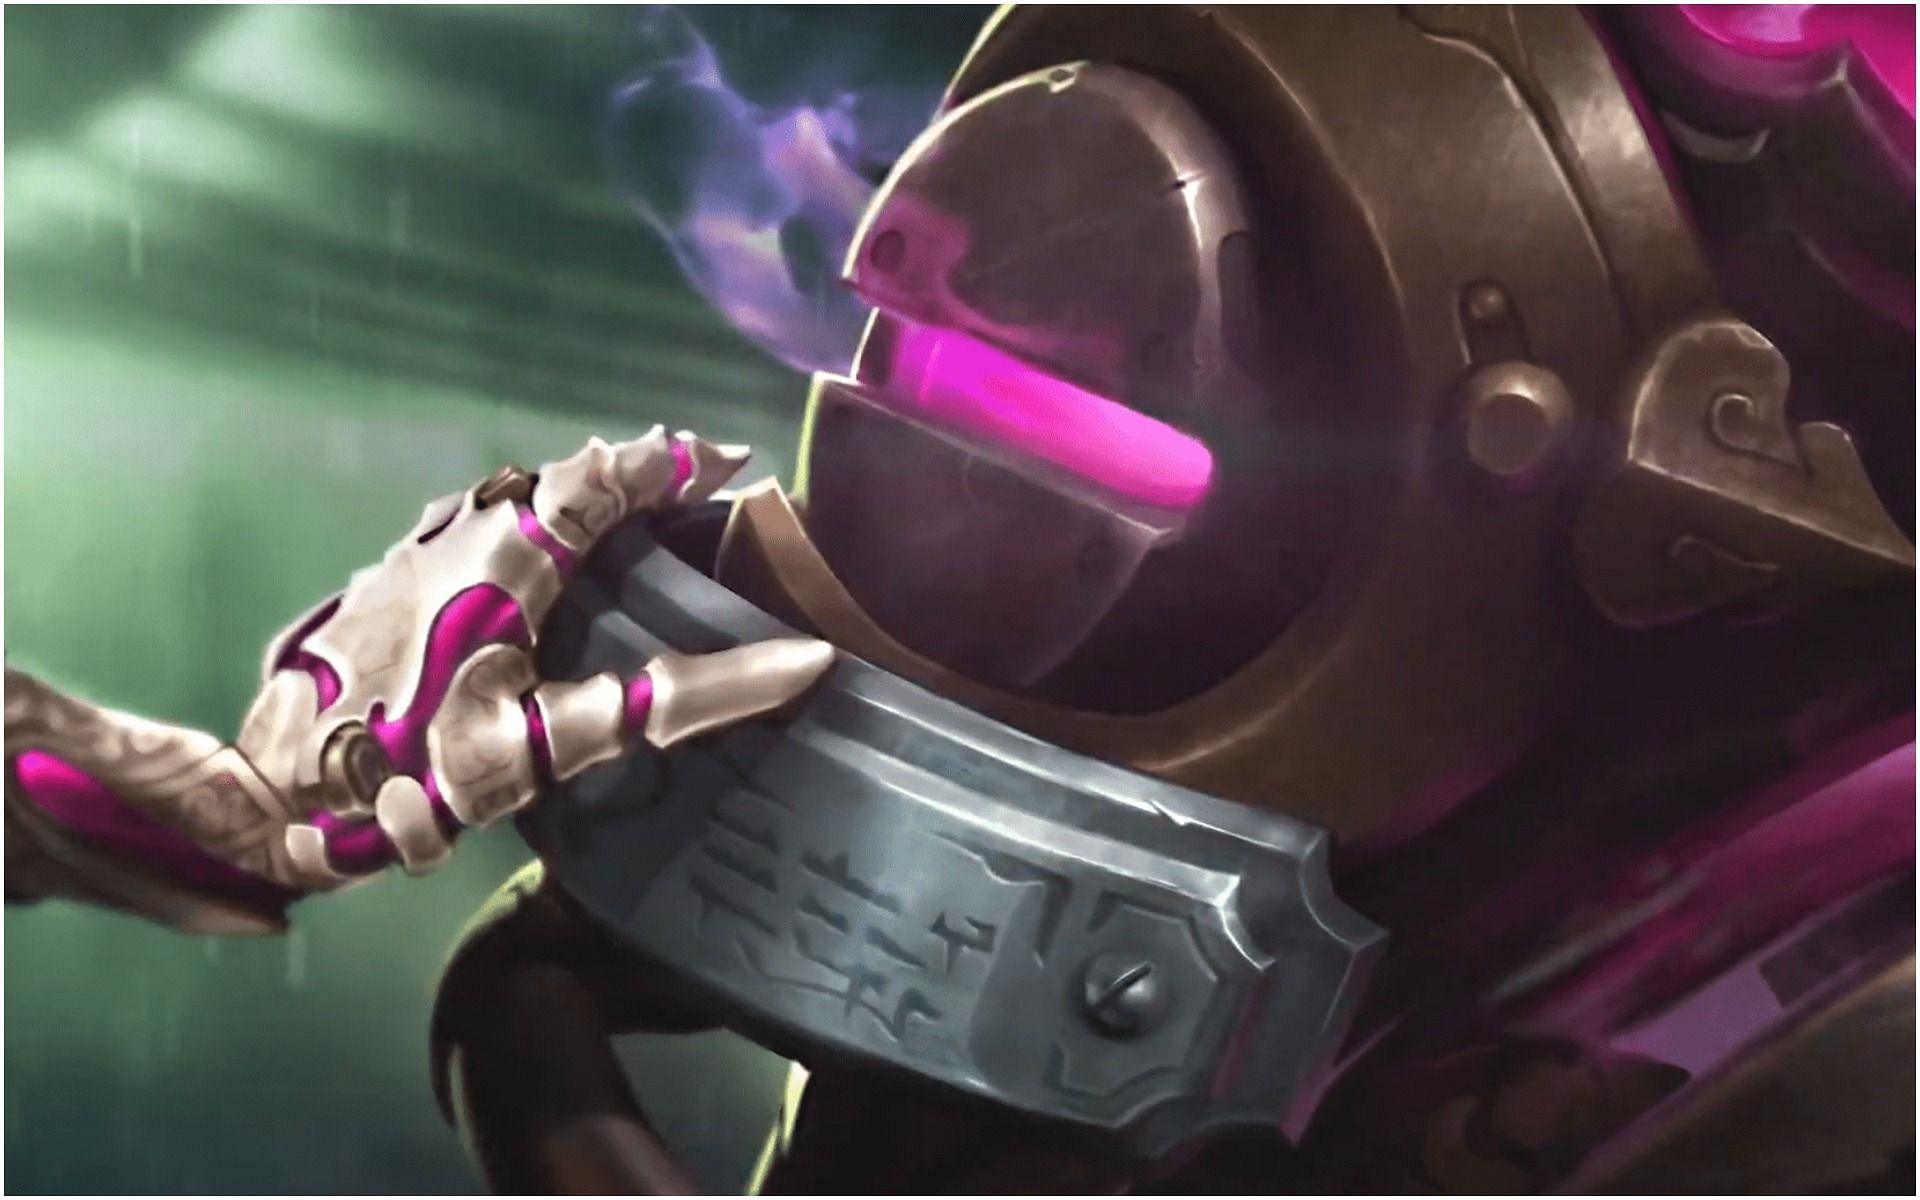 TFT leaks claim that the name of the upcoming support champion might be Renata (Image via Riot Games)